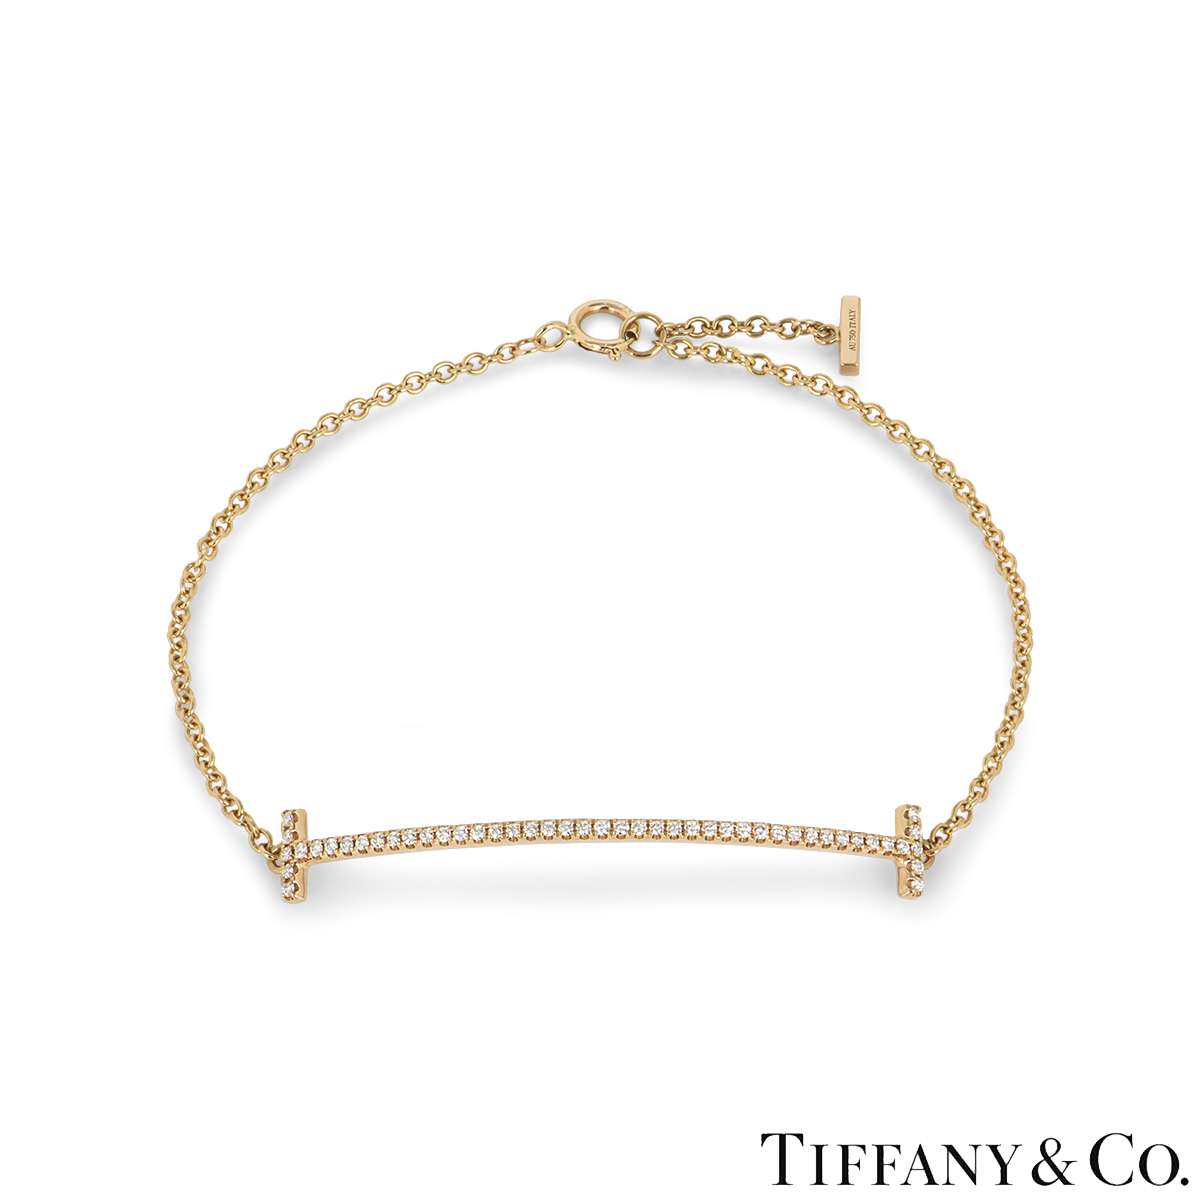 Tiffany  Co Lace Collection Diamond Clover Bracelet  Pampillonia Jewelers   Estate and Designer Jewelry